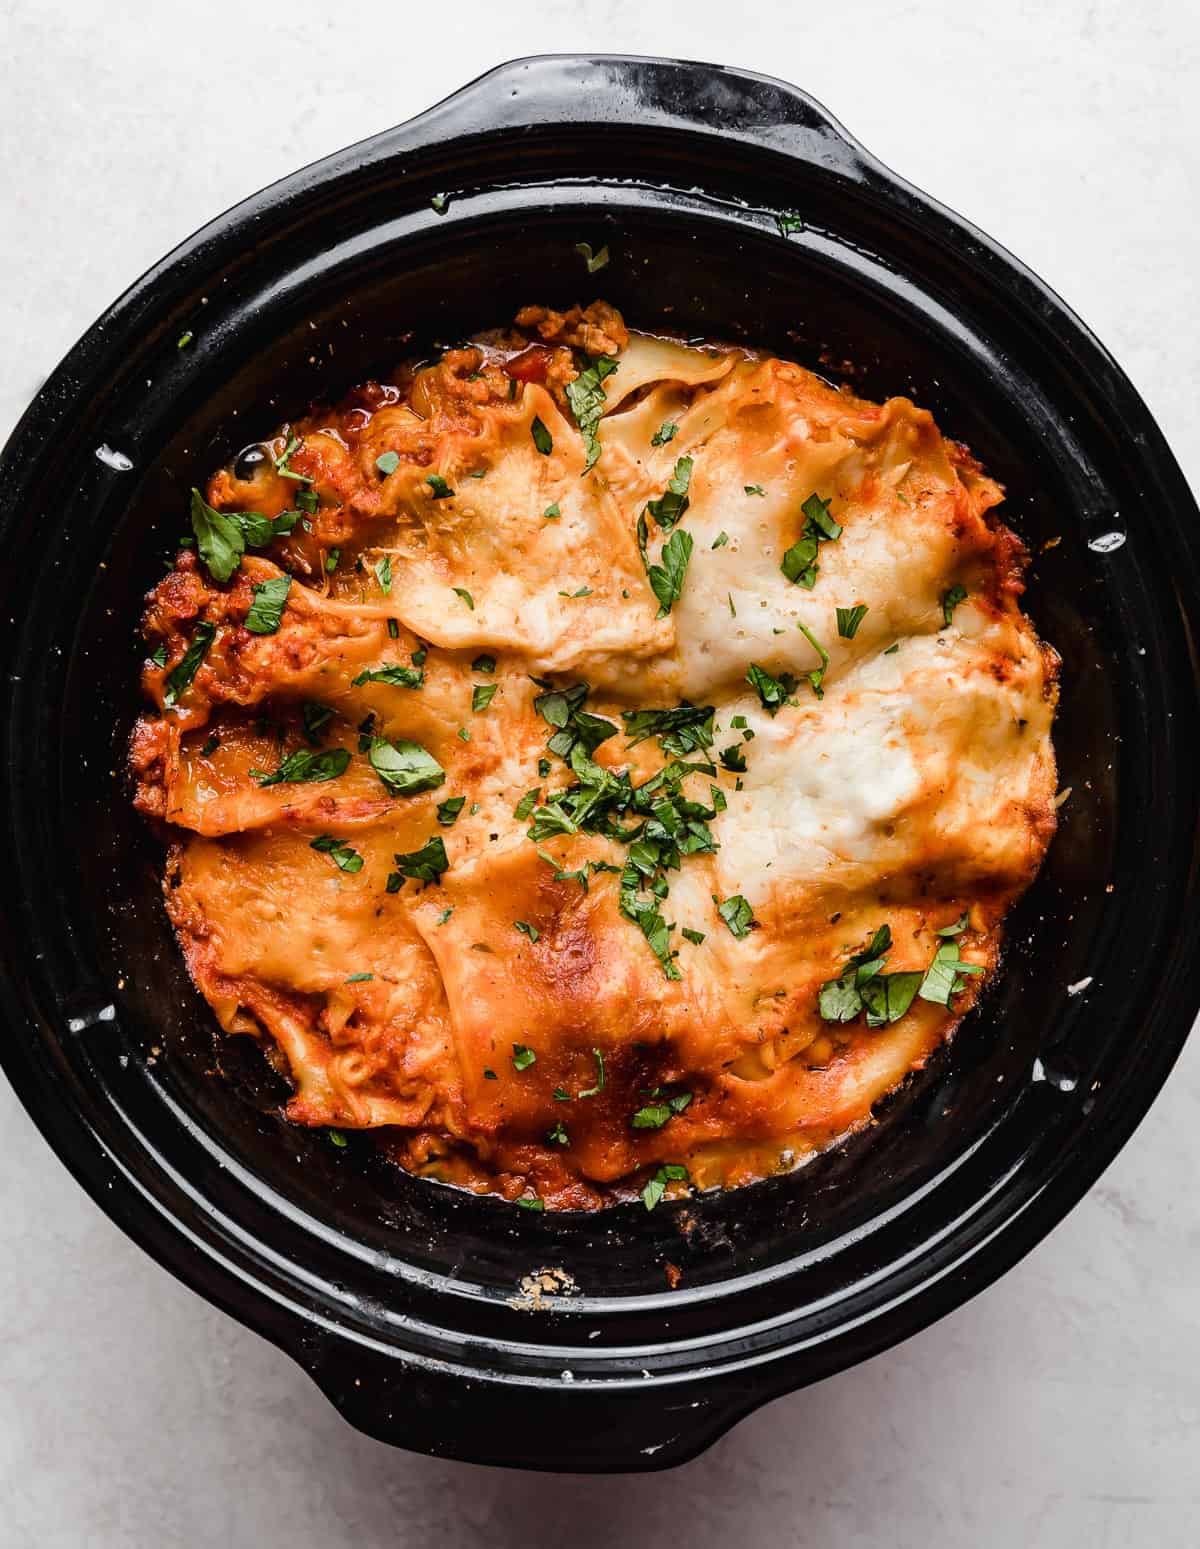 A warm freshly cooked Slow Cooker Lasagna in a black round crock pot garnished with fresh parsley.